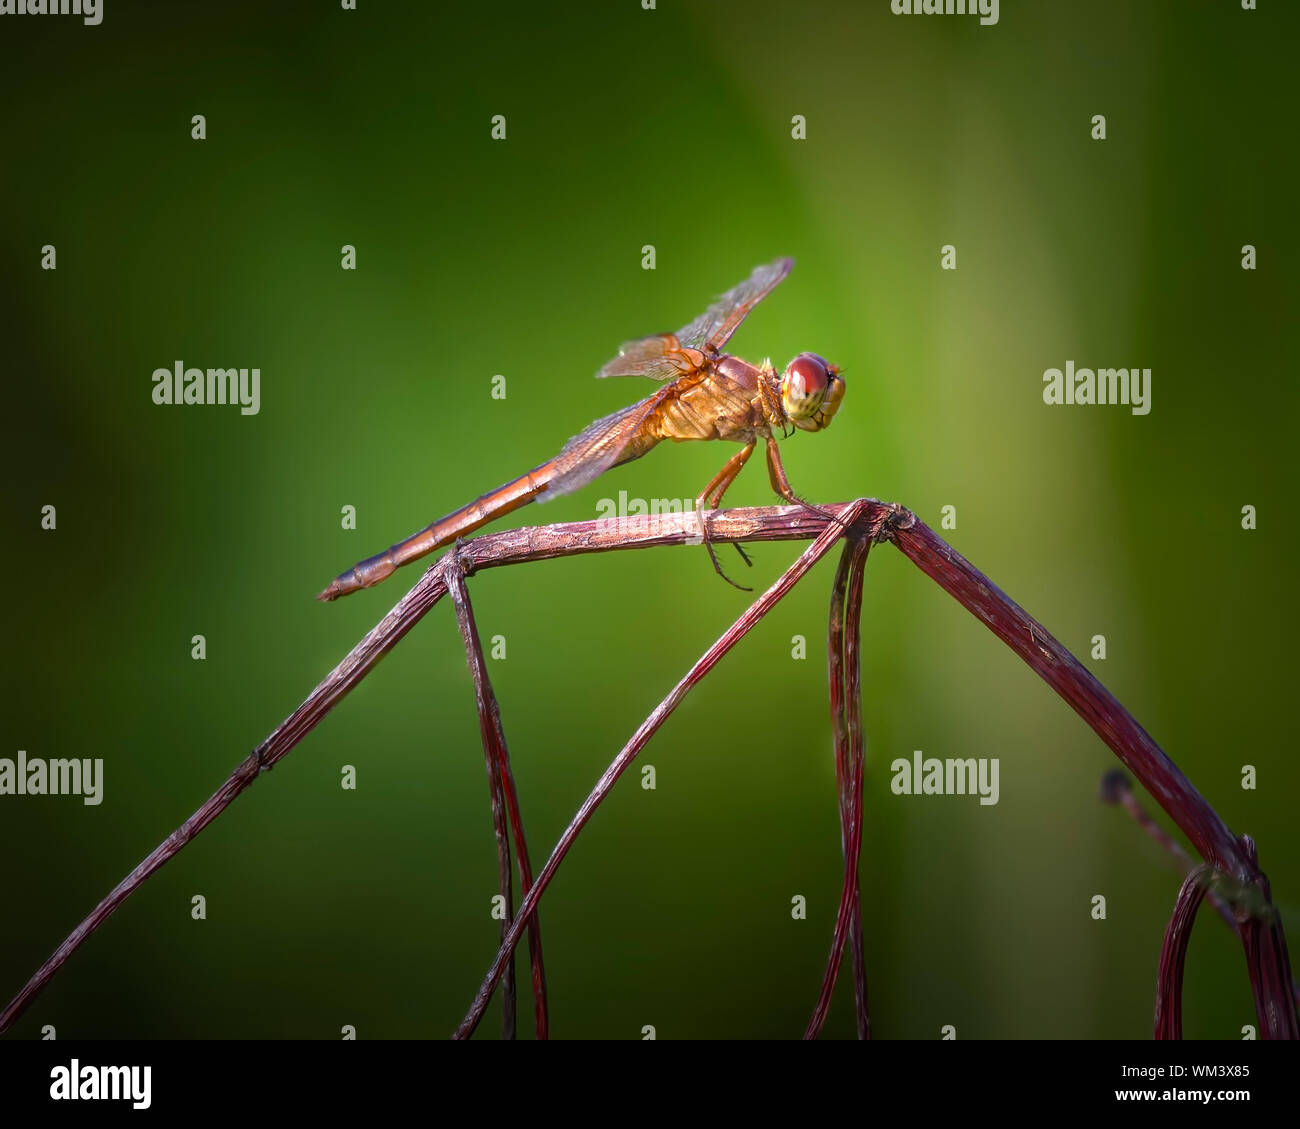 A dragonfly seems to be building the framework of a house in the Florida Everglades. Stock Photo